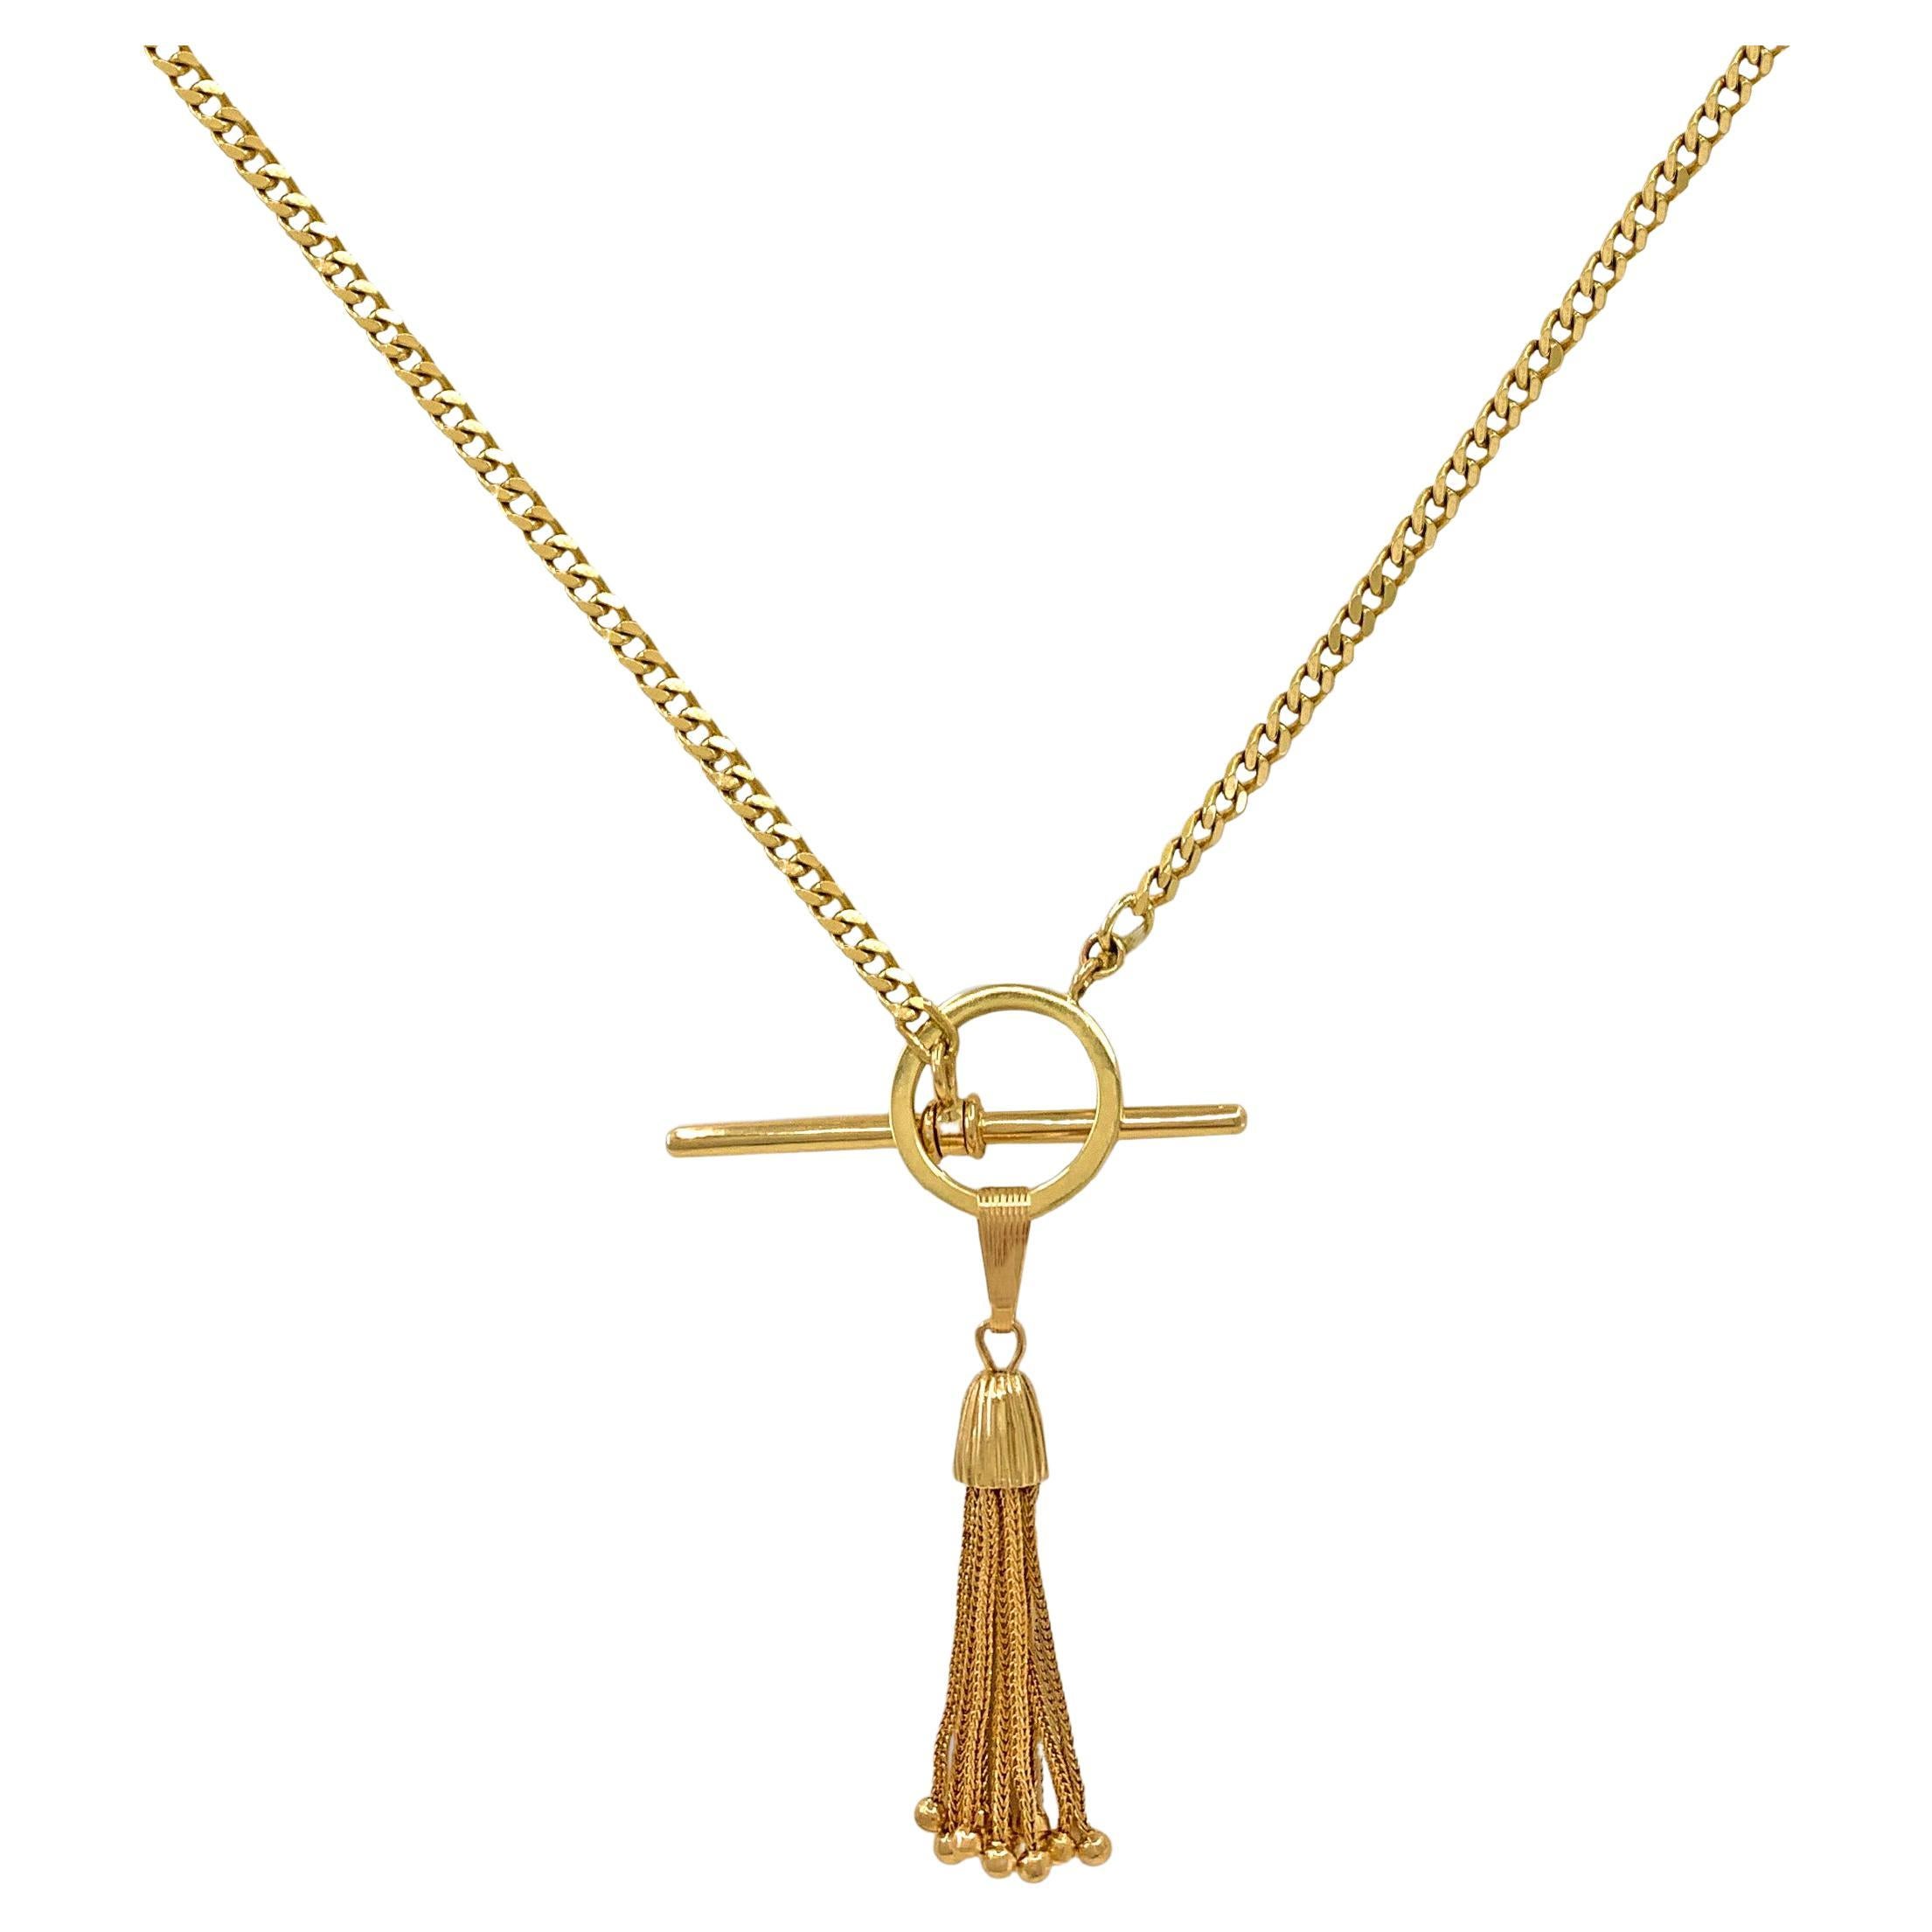 Princess Length Curb Chain with Toggle Closure & Tassel Ornament in Yellow Gold For Sale